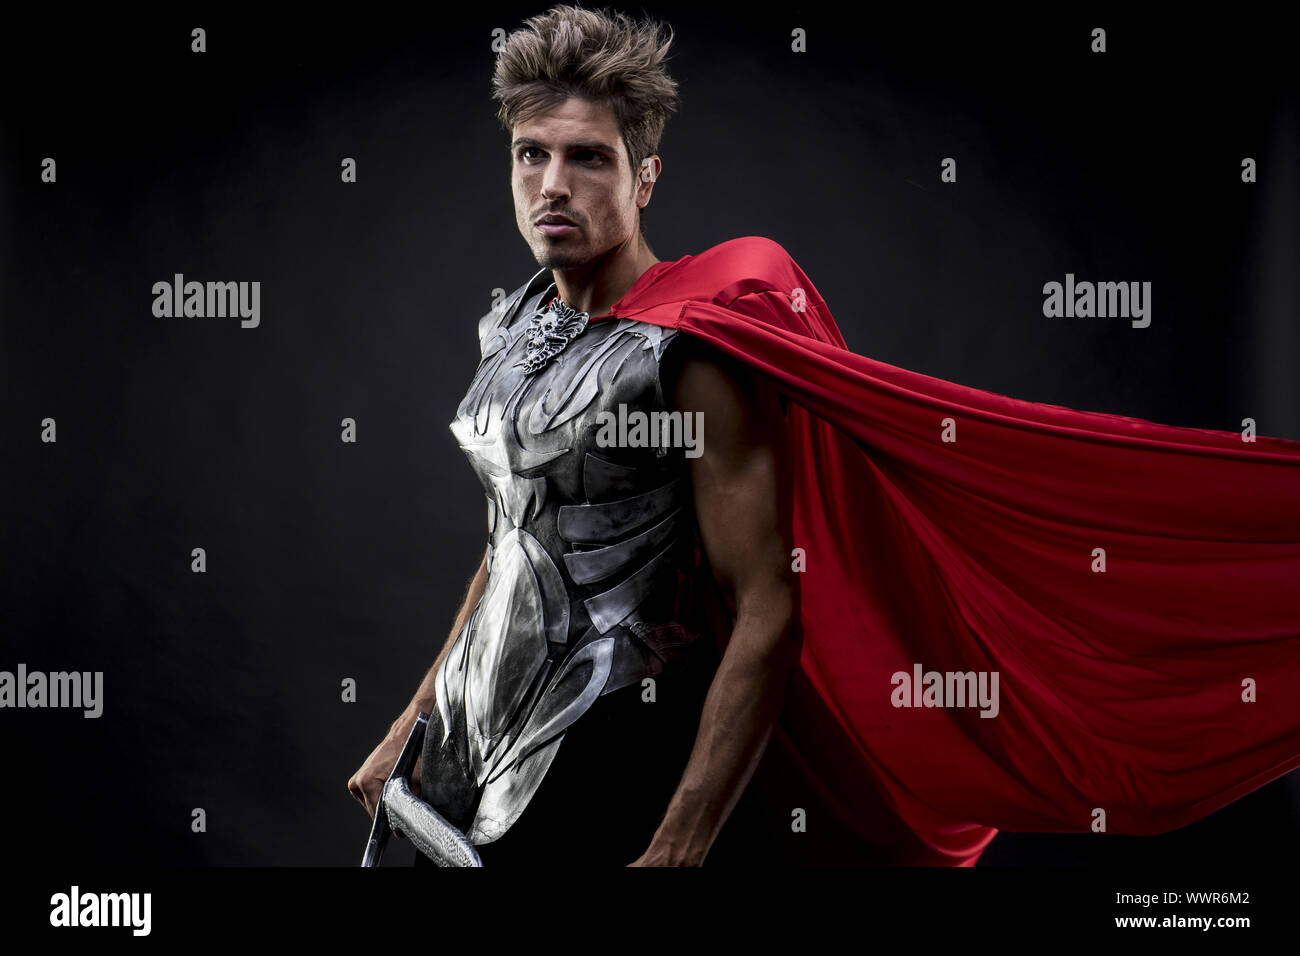 centurion or Roman warrior with iron armor, military helmet with horsehair and sword Stock Photo